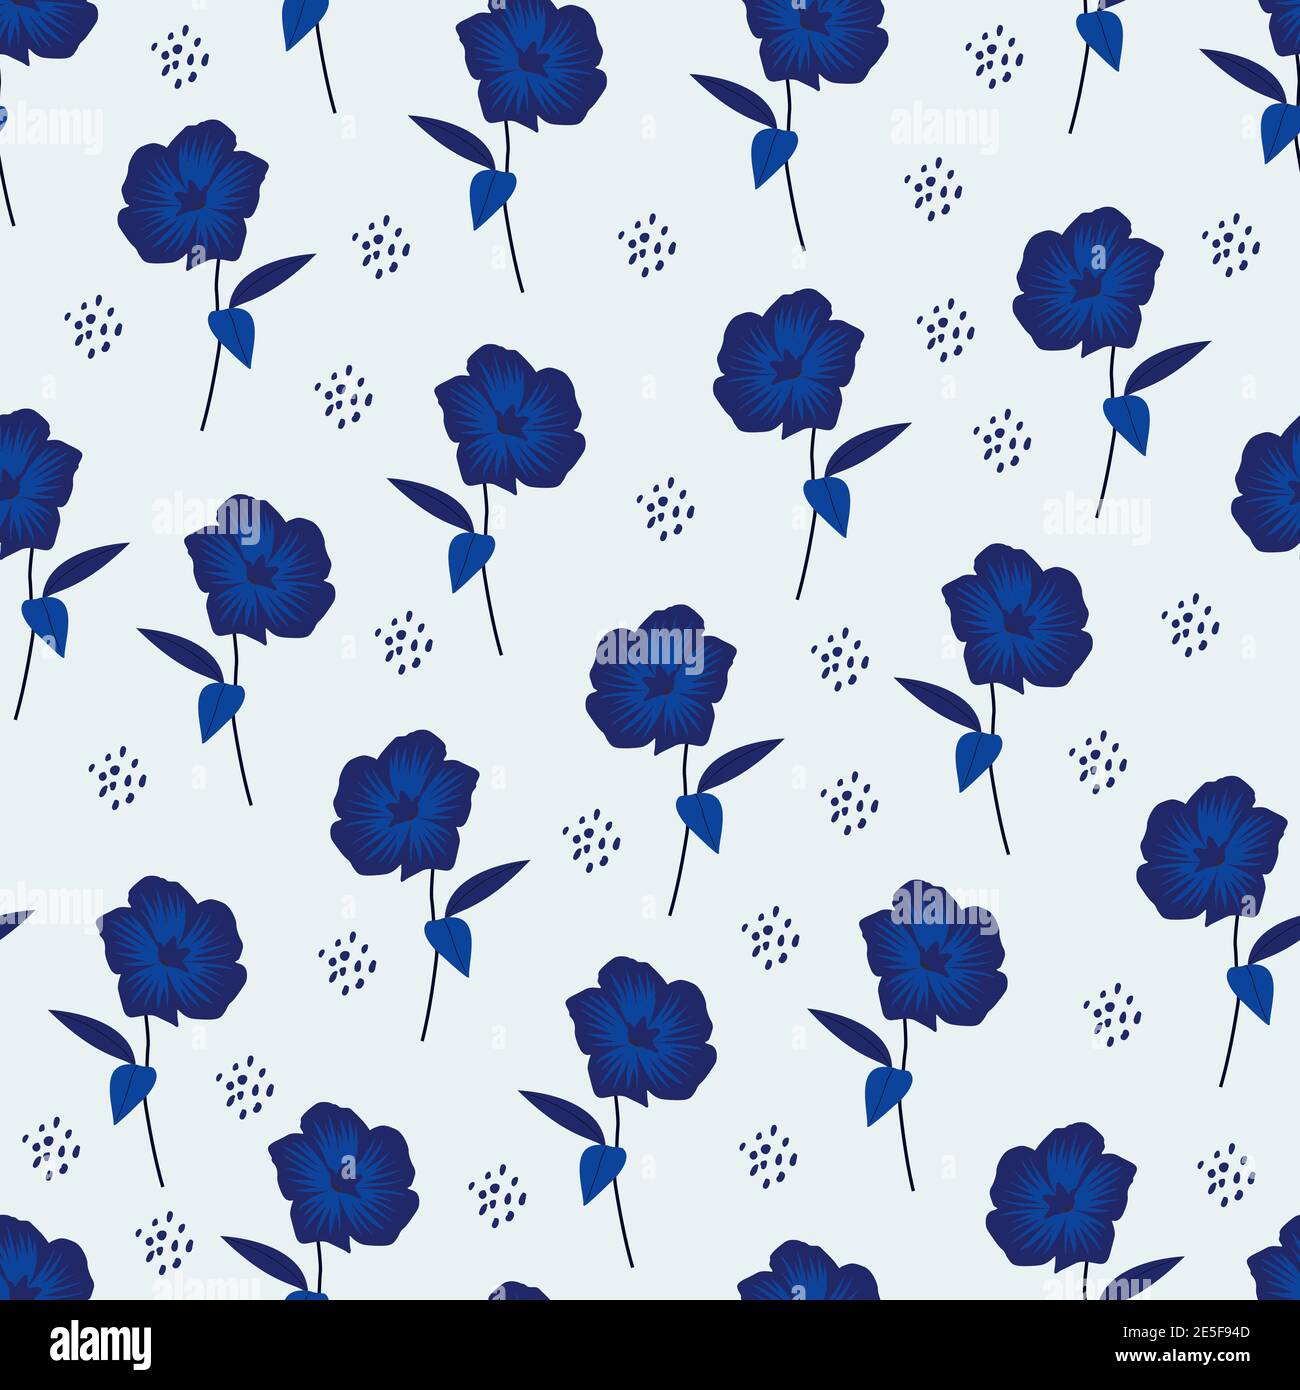 Modern fashionable vector seamless floral ditsy pattern design of blue flowers. Elegant repeating blooming flowers texture background for textile Stock Vector